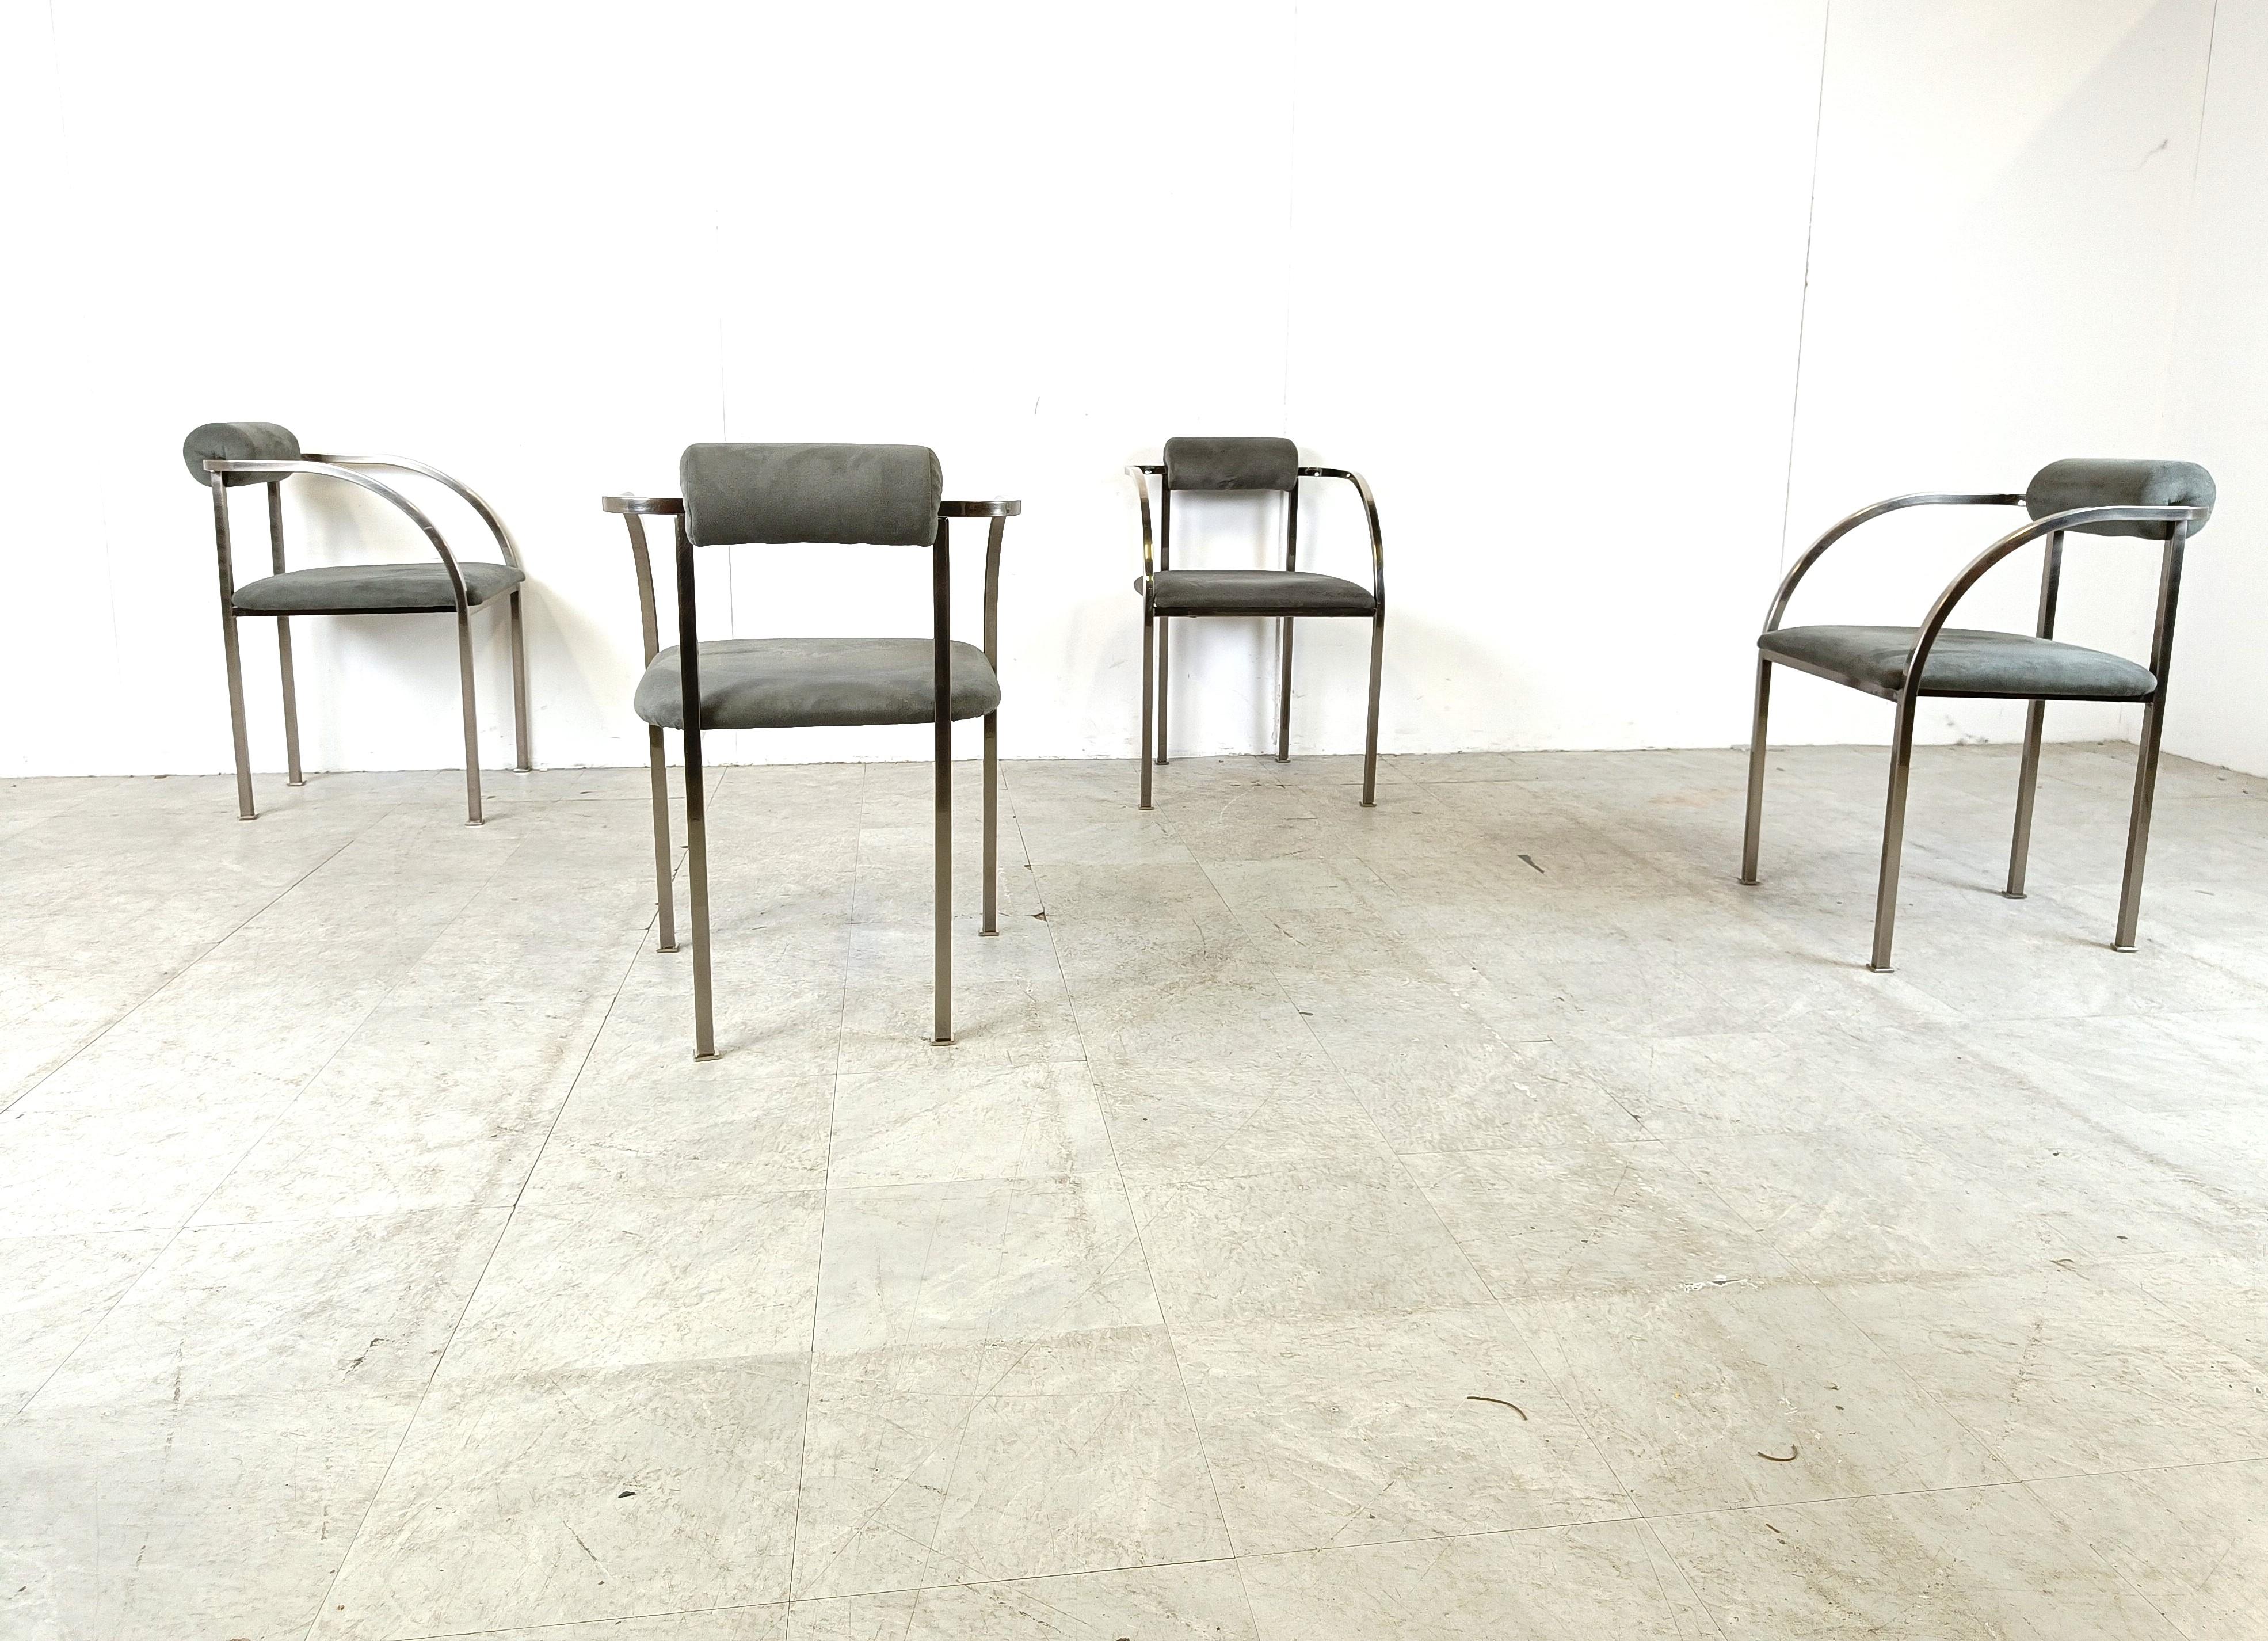 Set of four elegant post modern dining room chairs manufactured by Belgochrom.

Nicely designed metal frames with elegant legs. Upholstered in grey suede.

Belgochrom used to produce high end furniture and was the higher price-range furniture in